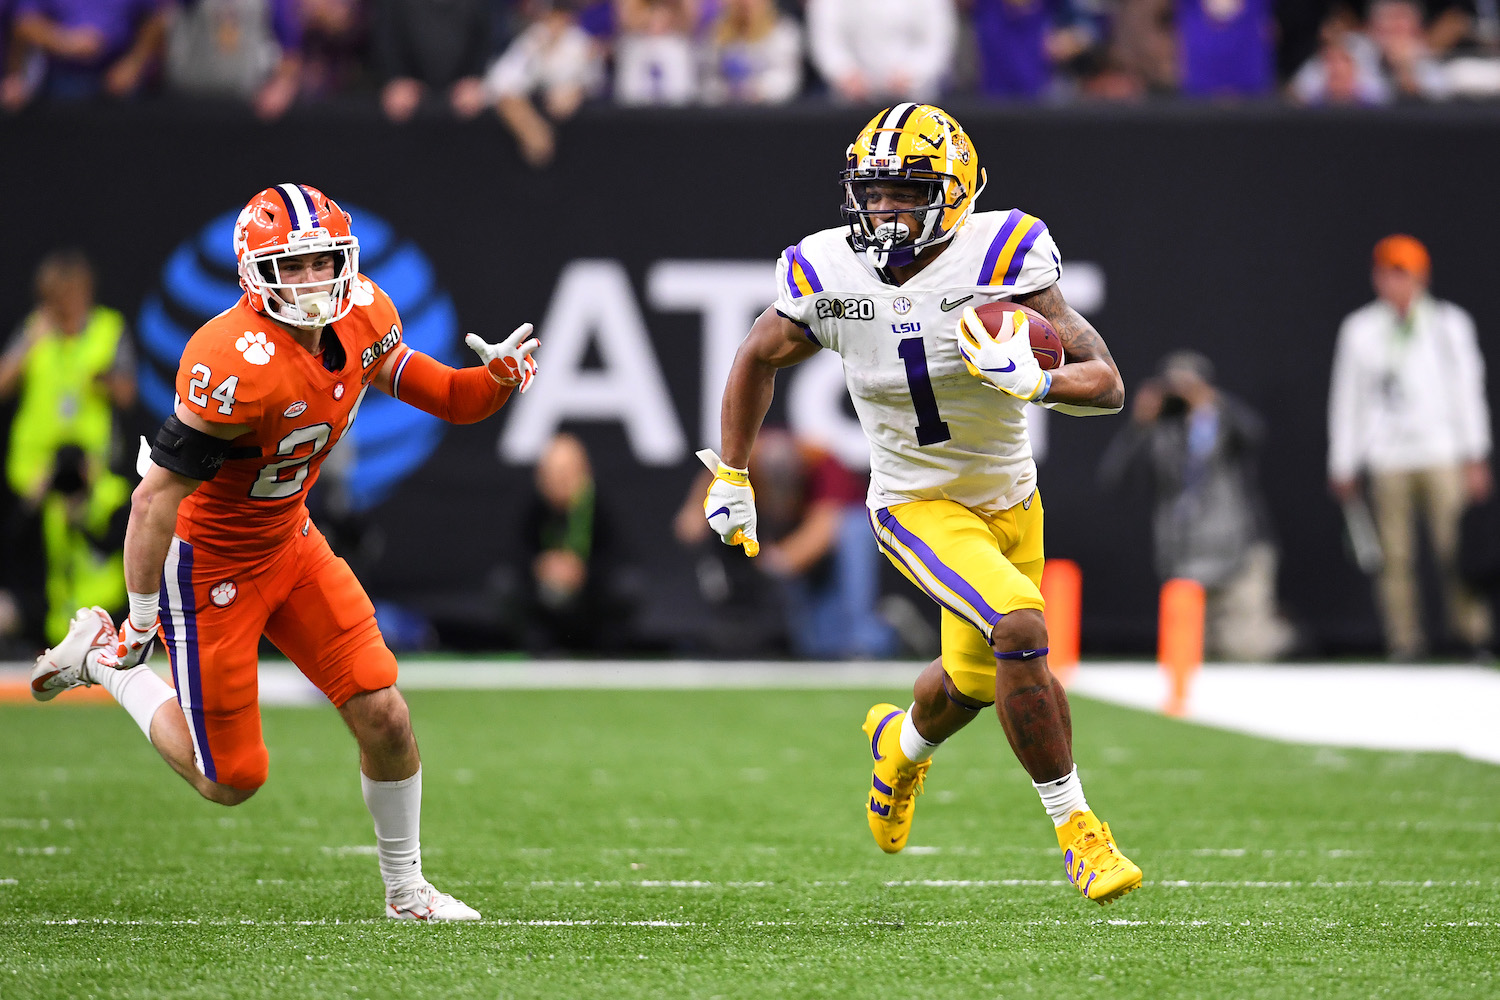 LSU’s Hopes for National Title Repeat Just Took Huge Hit With Loss of Star Receiver Ja’Marr Chase